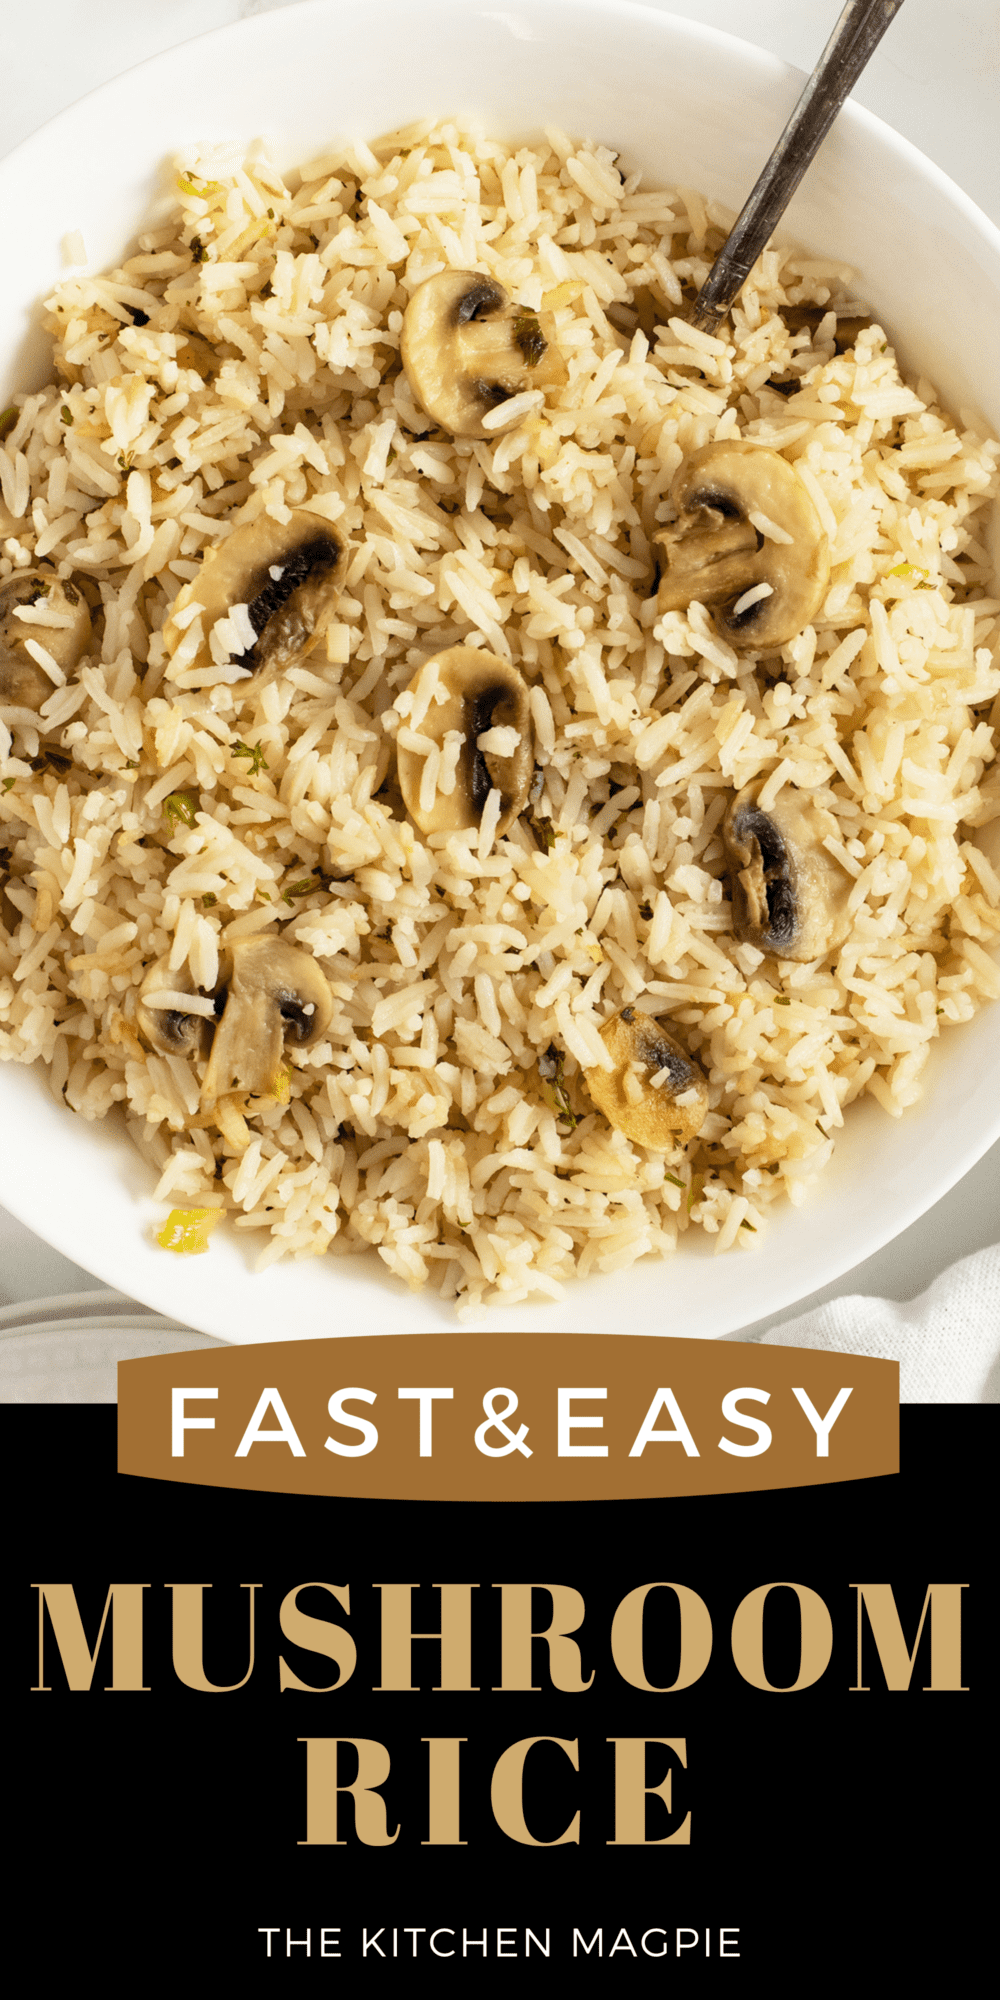 Simply cook  tender mushrooms and serve them as a flavorful rice dish, perfect for a light supper or a great side dish.